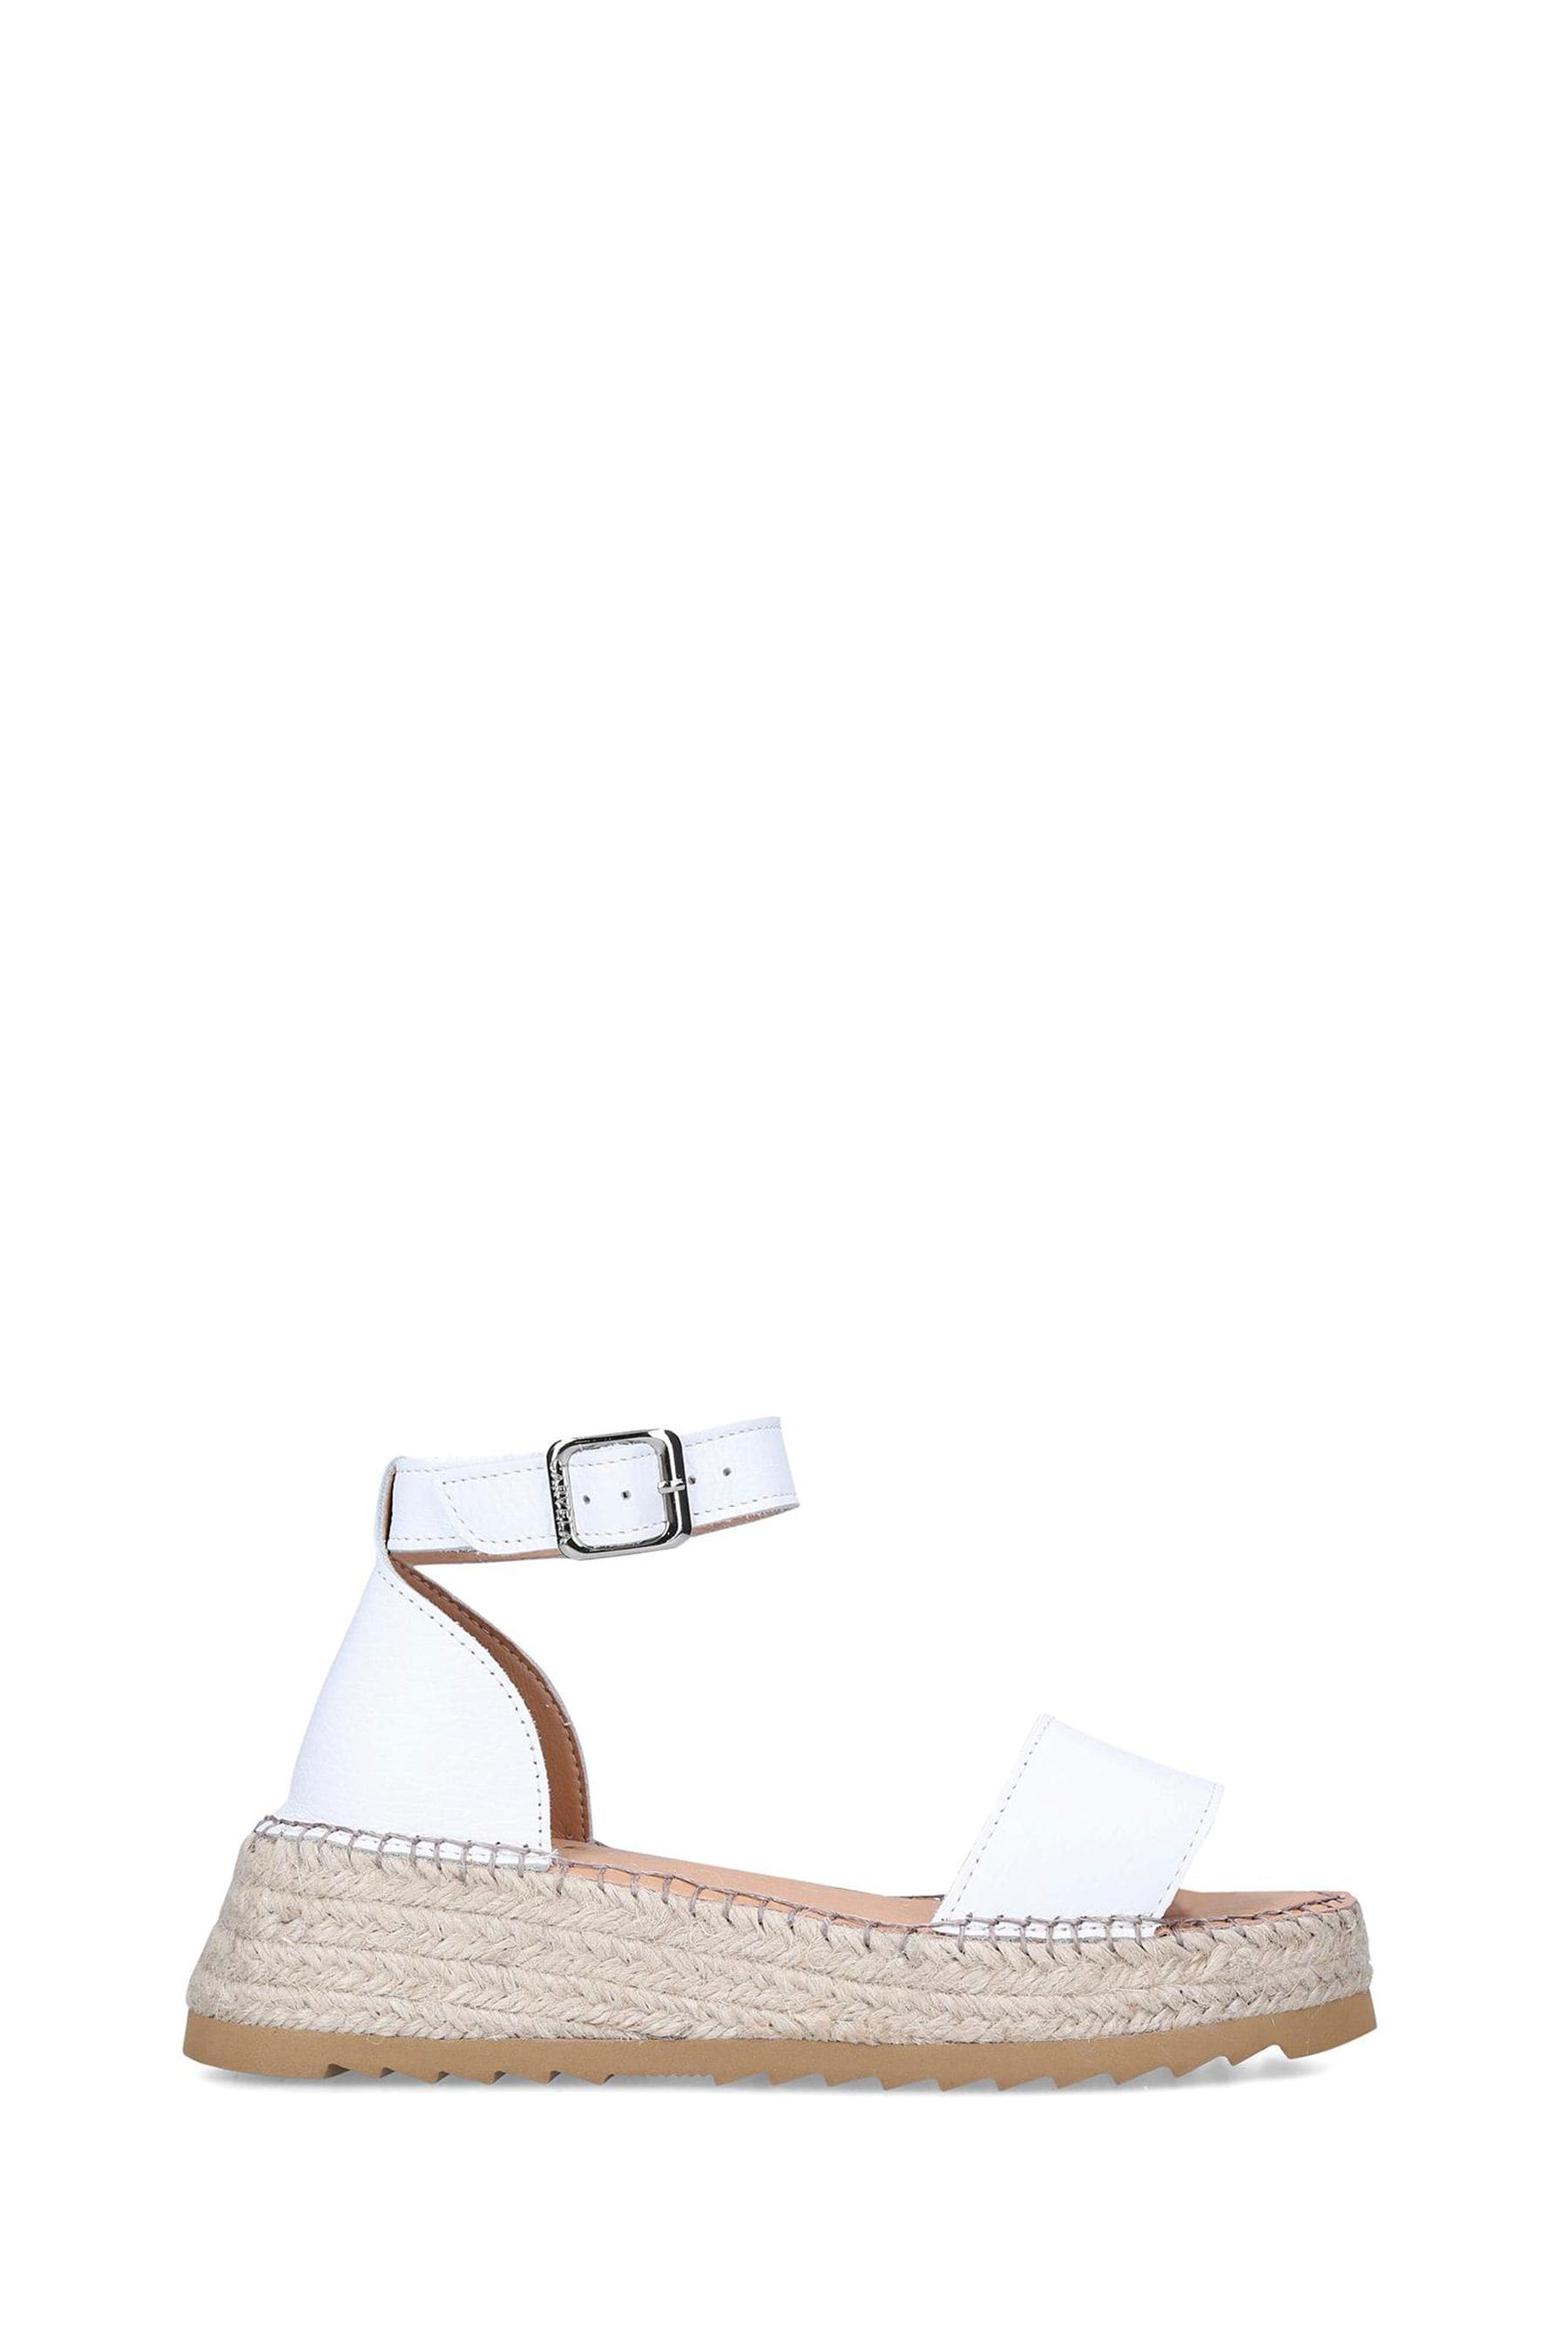 Buy Carvela Chase Sandals from the Next UK online shop